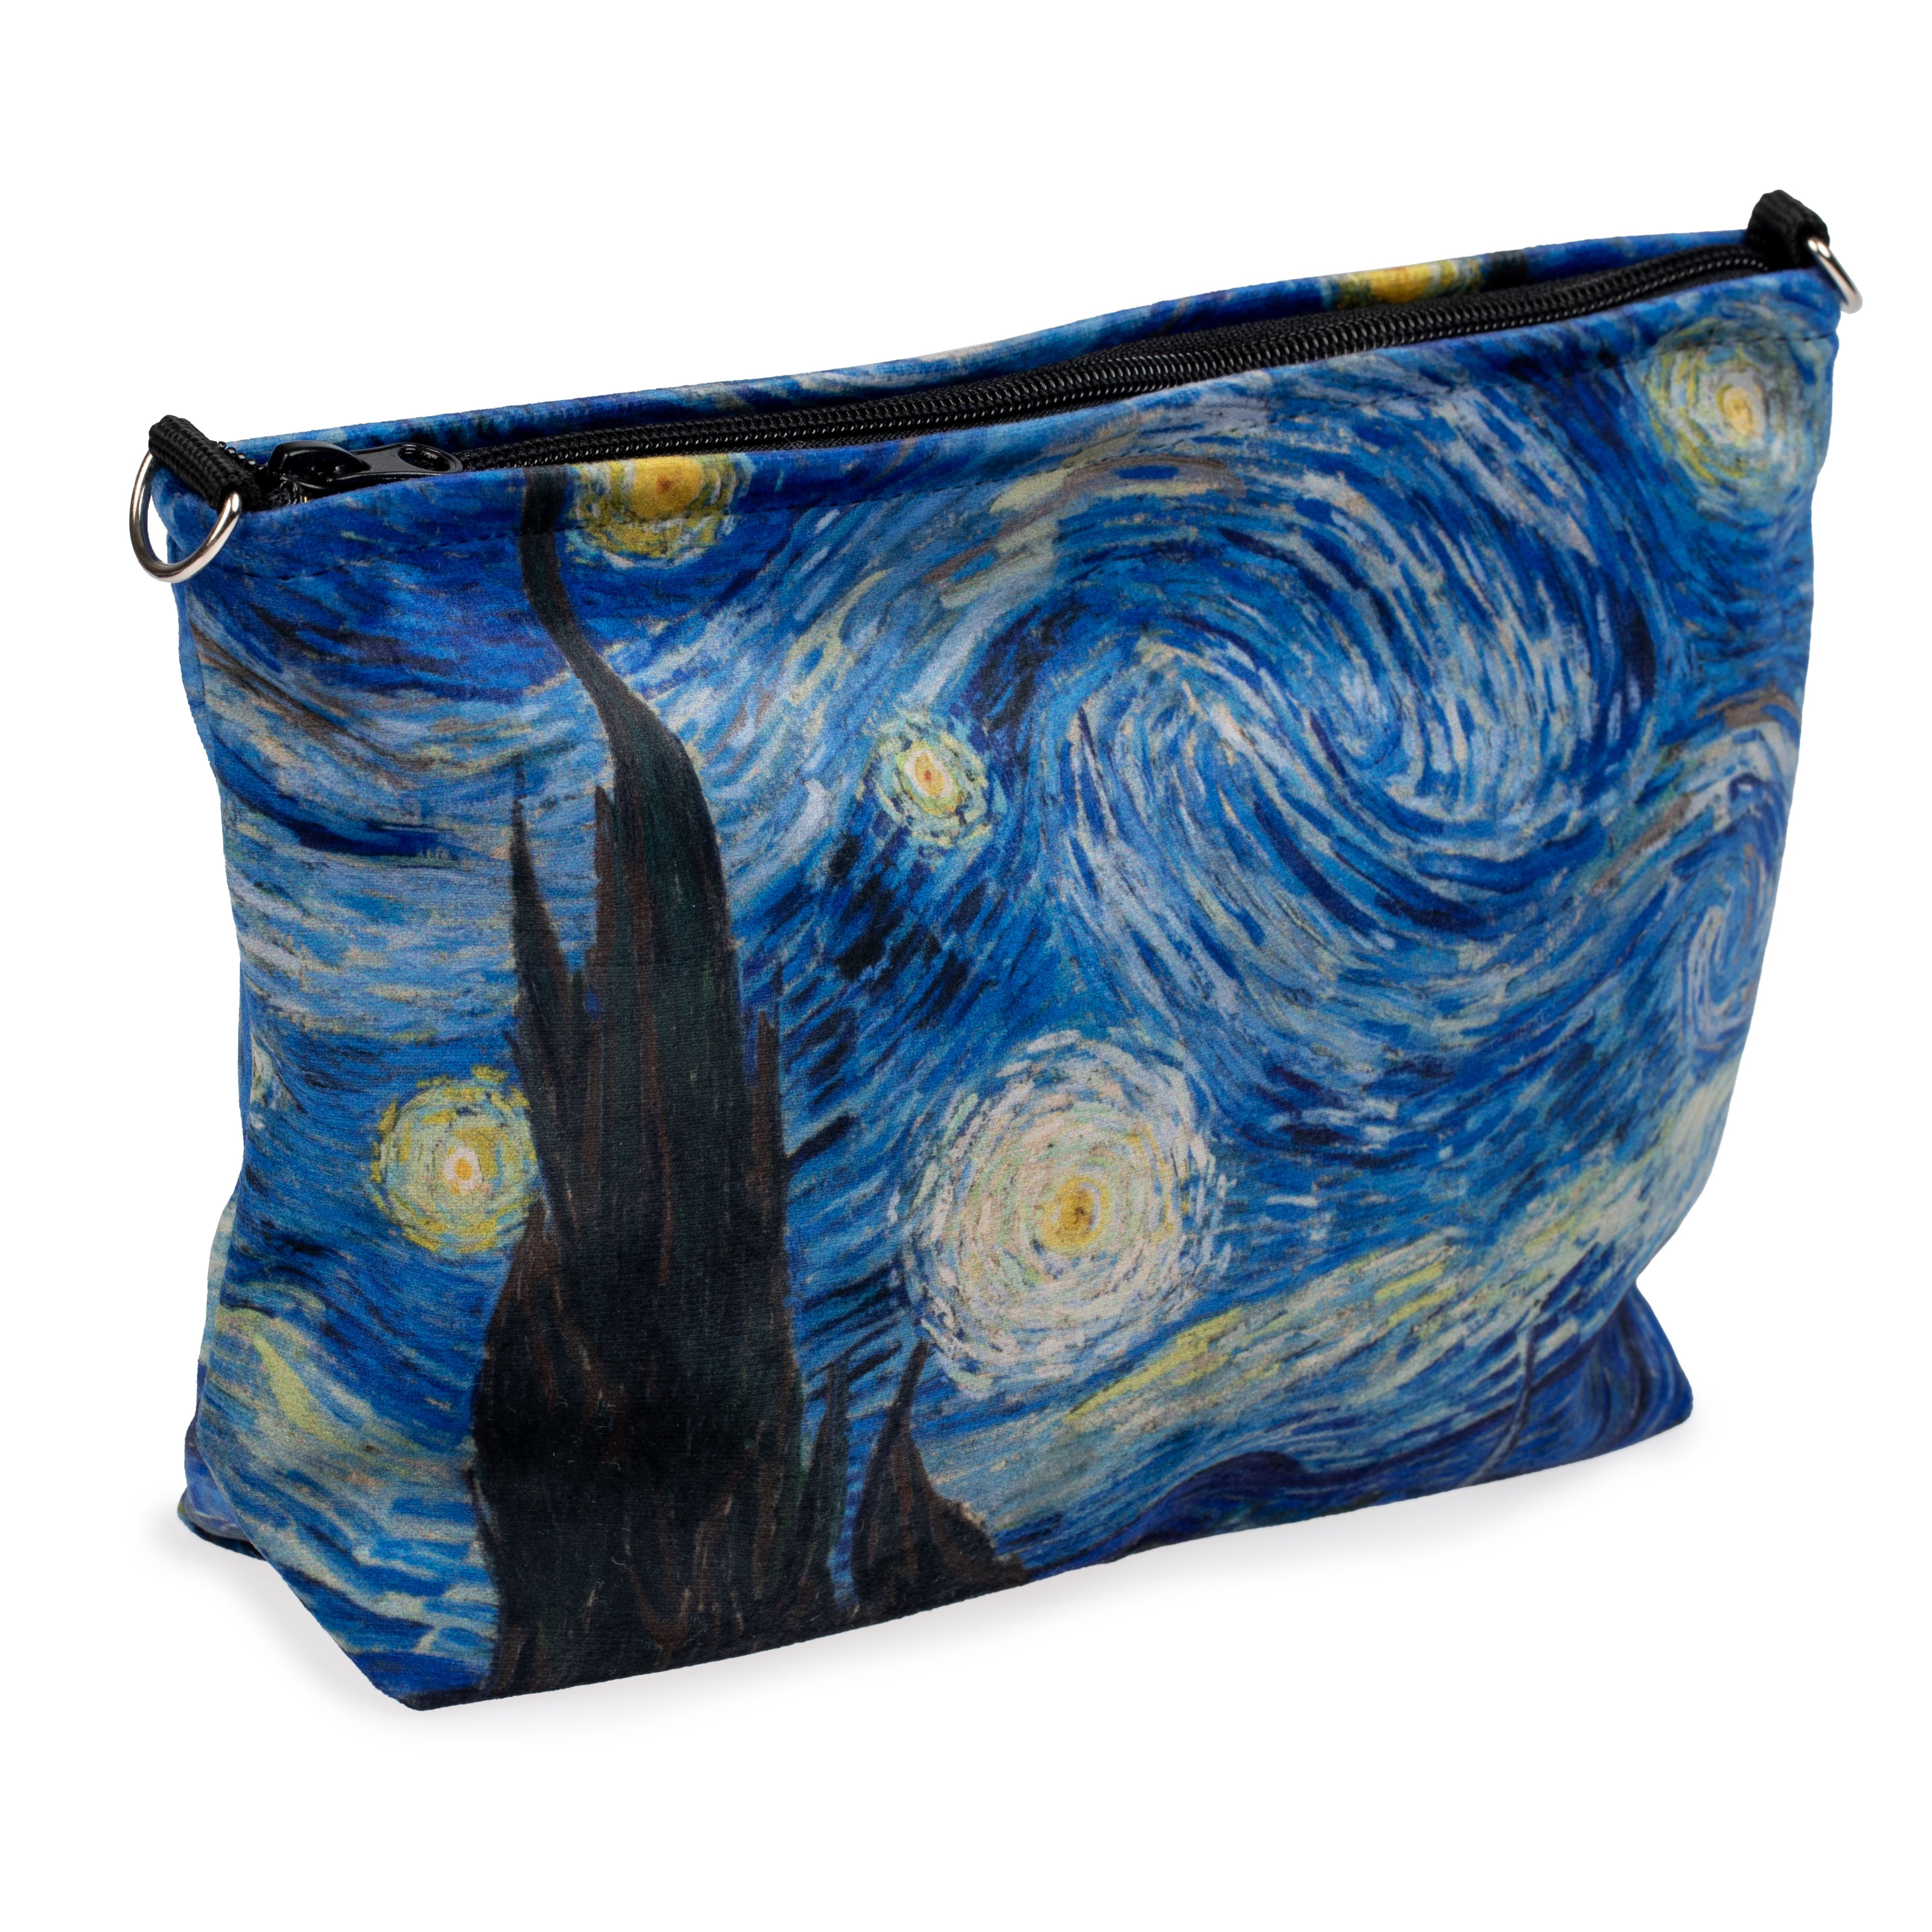 Cosmetic case Vincent van Gogh "The Starry Night"